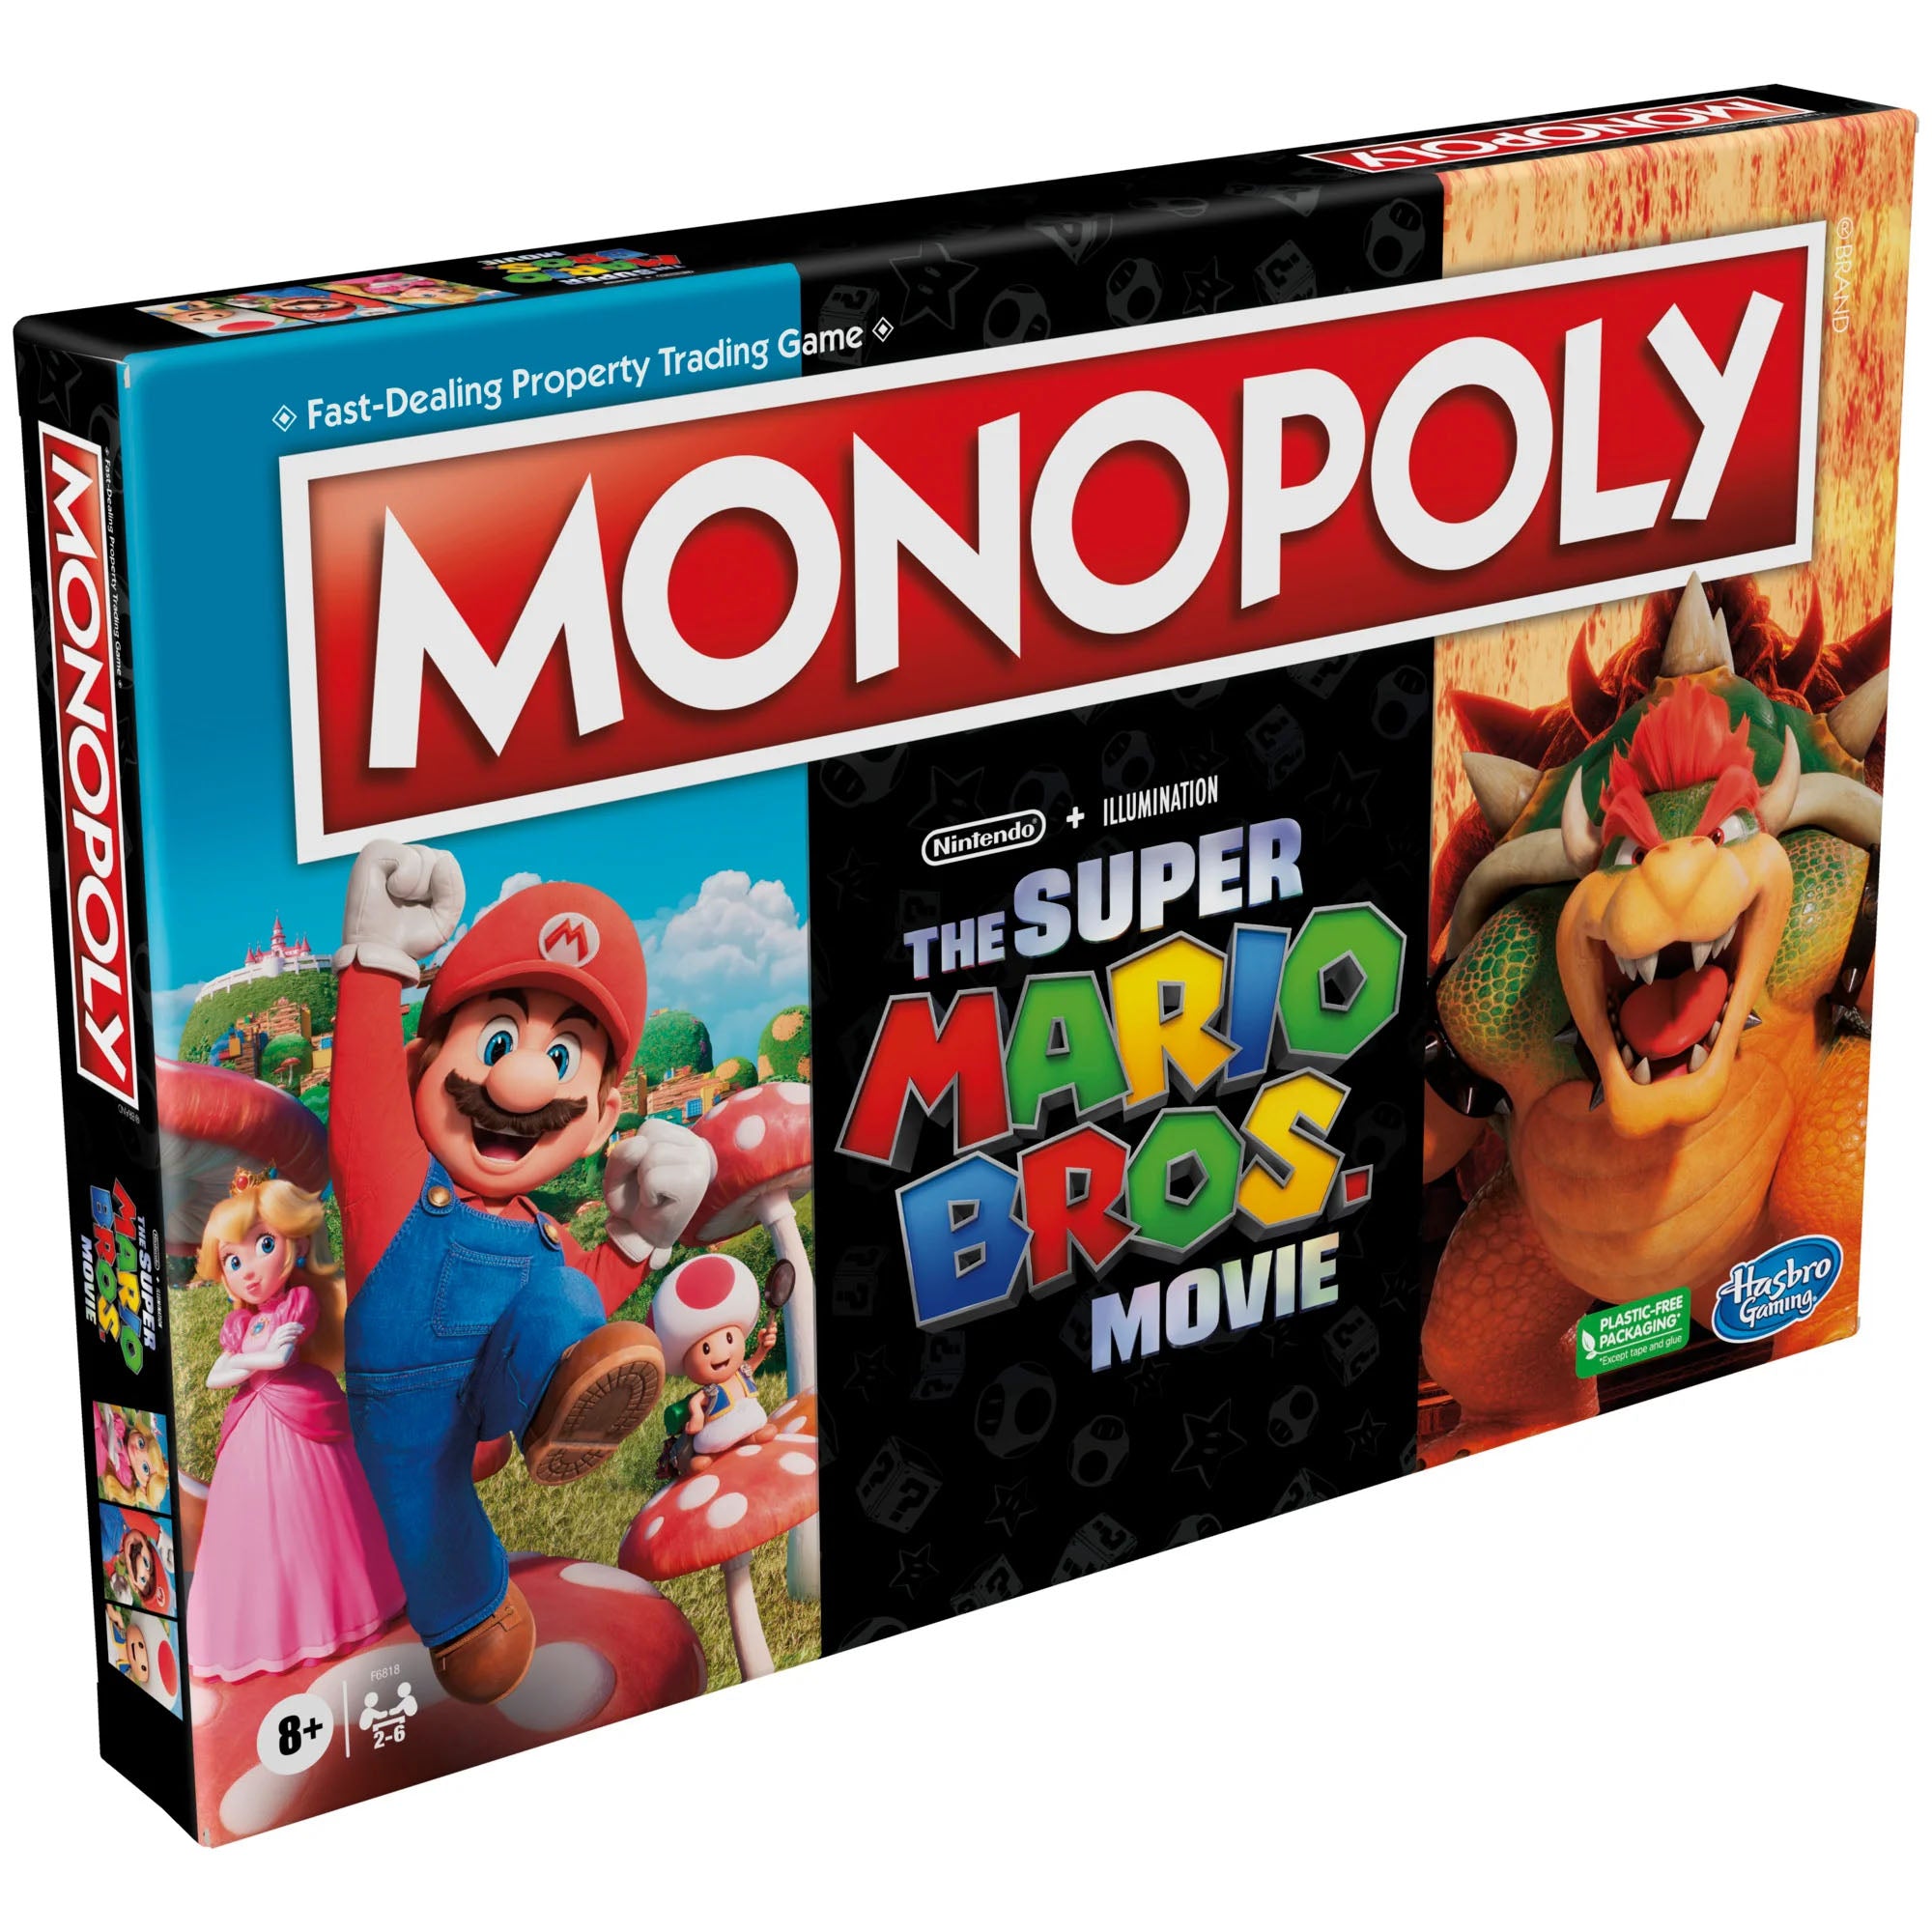  Monopoly Gamer Sonic The Hedgehog Edition Board Game for Kids  Ages 8 & Up; Sonic Video Gamer Themed Board Game : Toys & Games